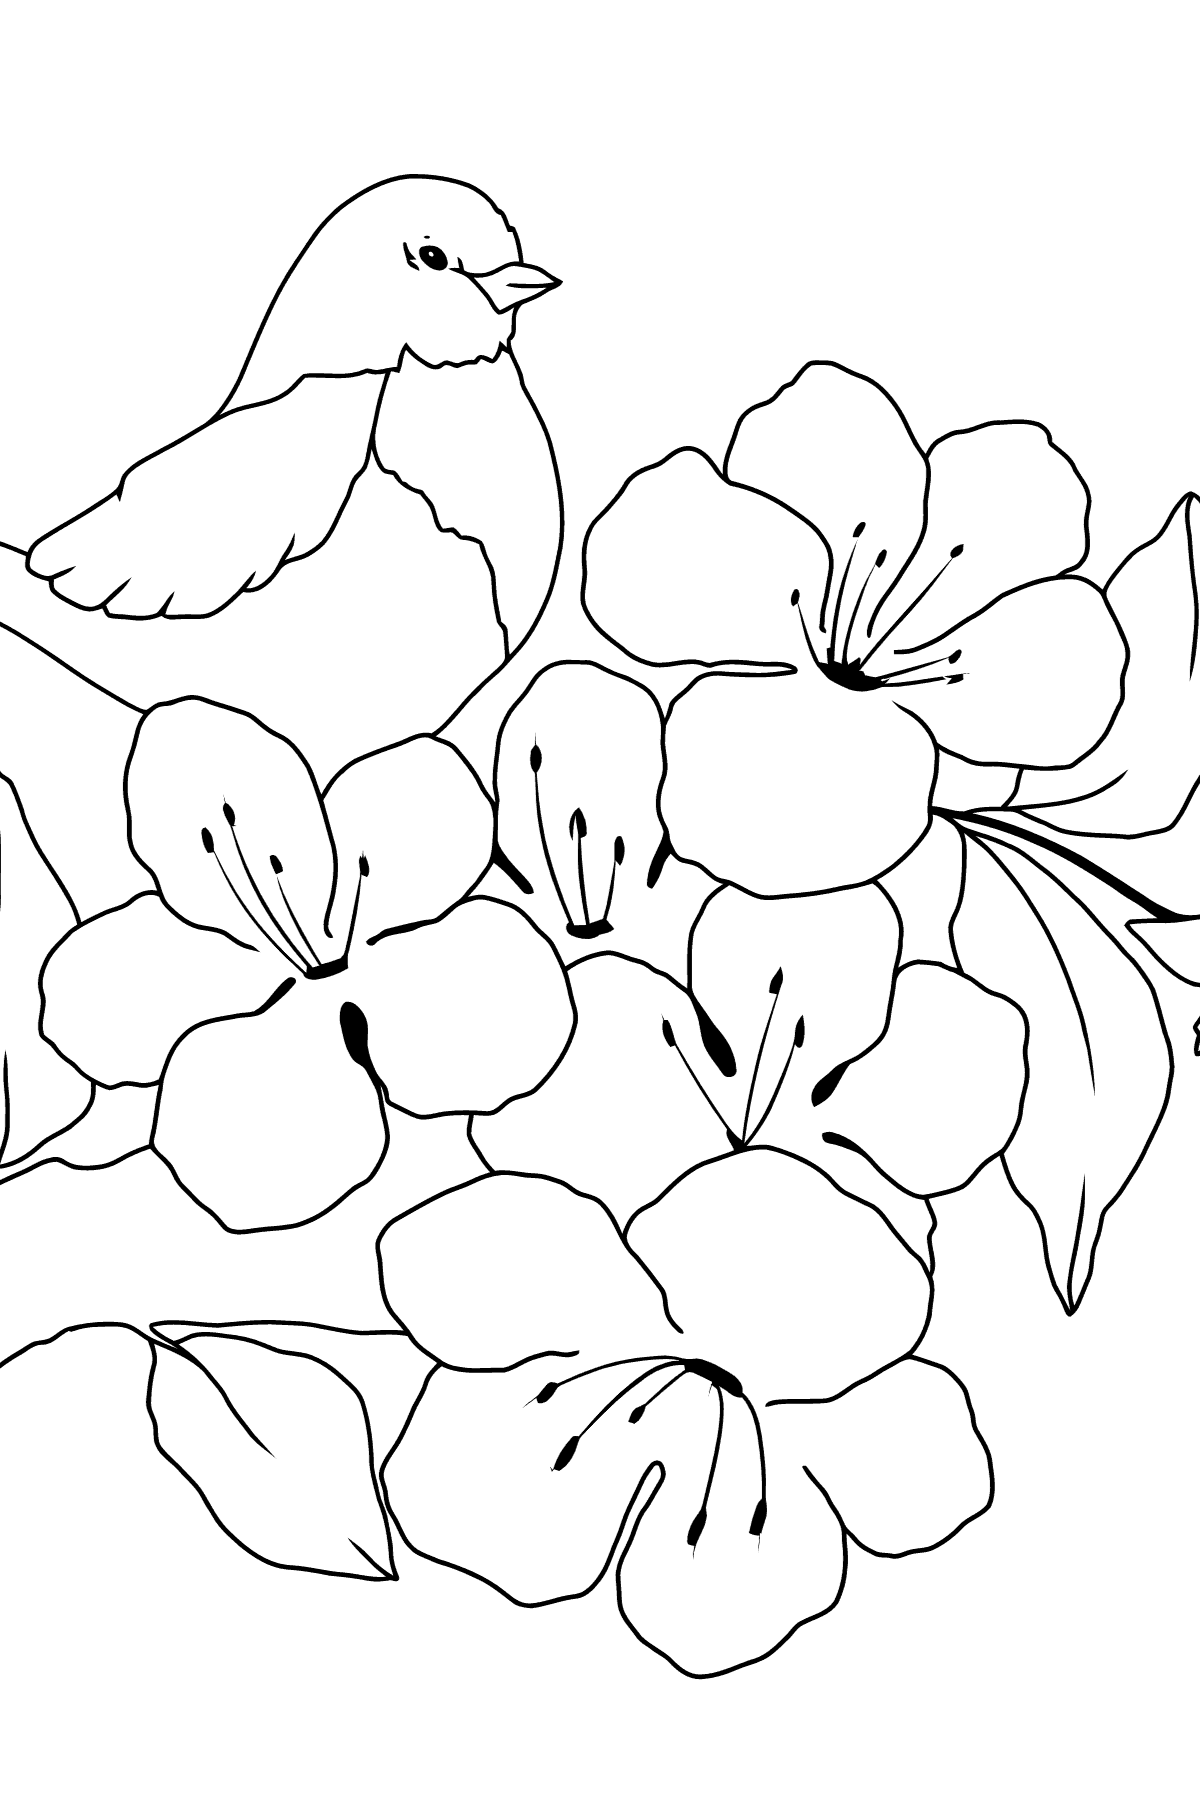 Summer Coloring Page - A Bird on a Branch with Flowers for Kids 